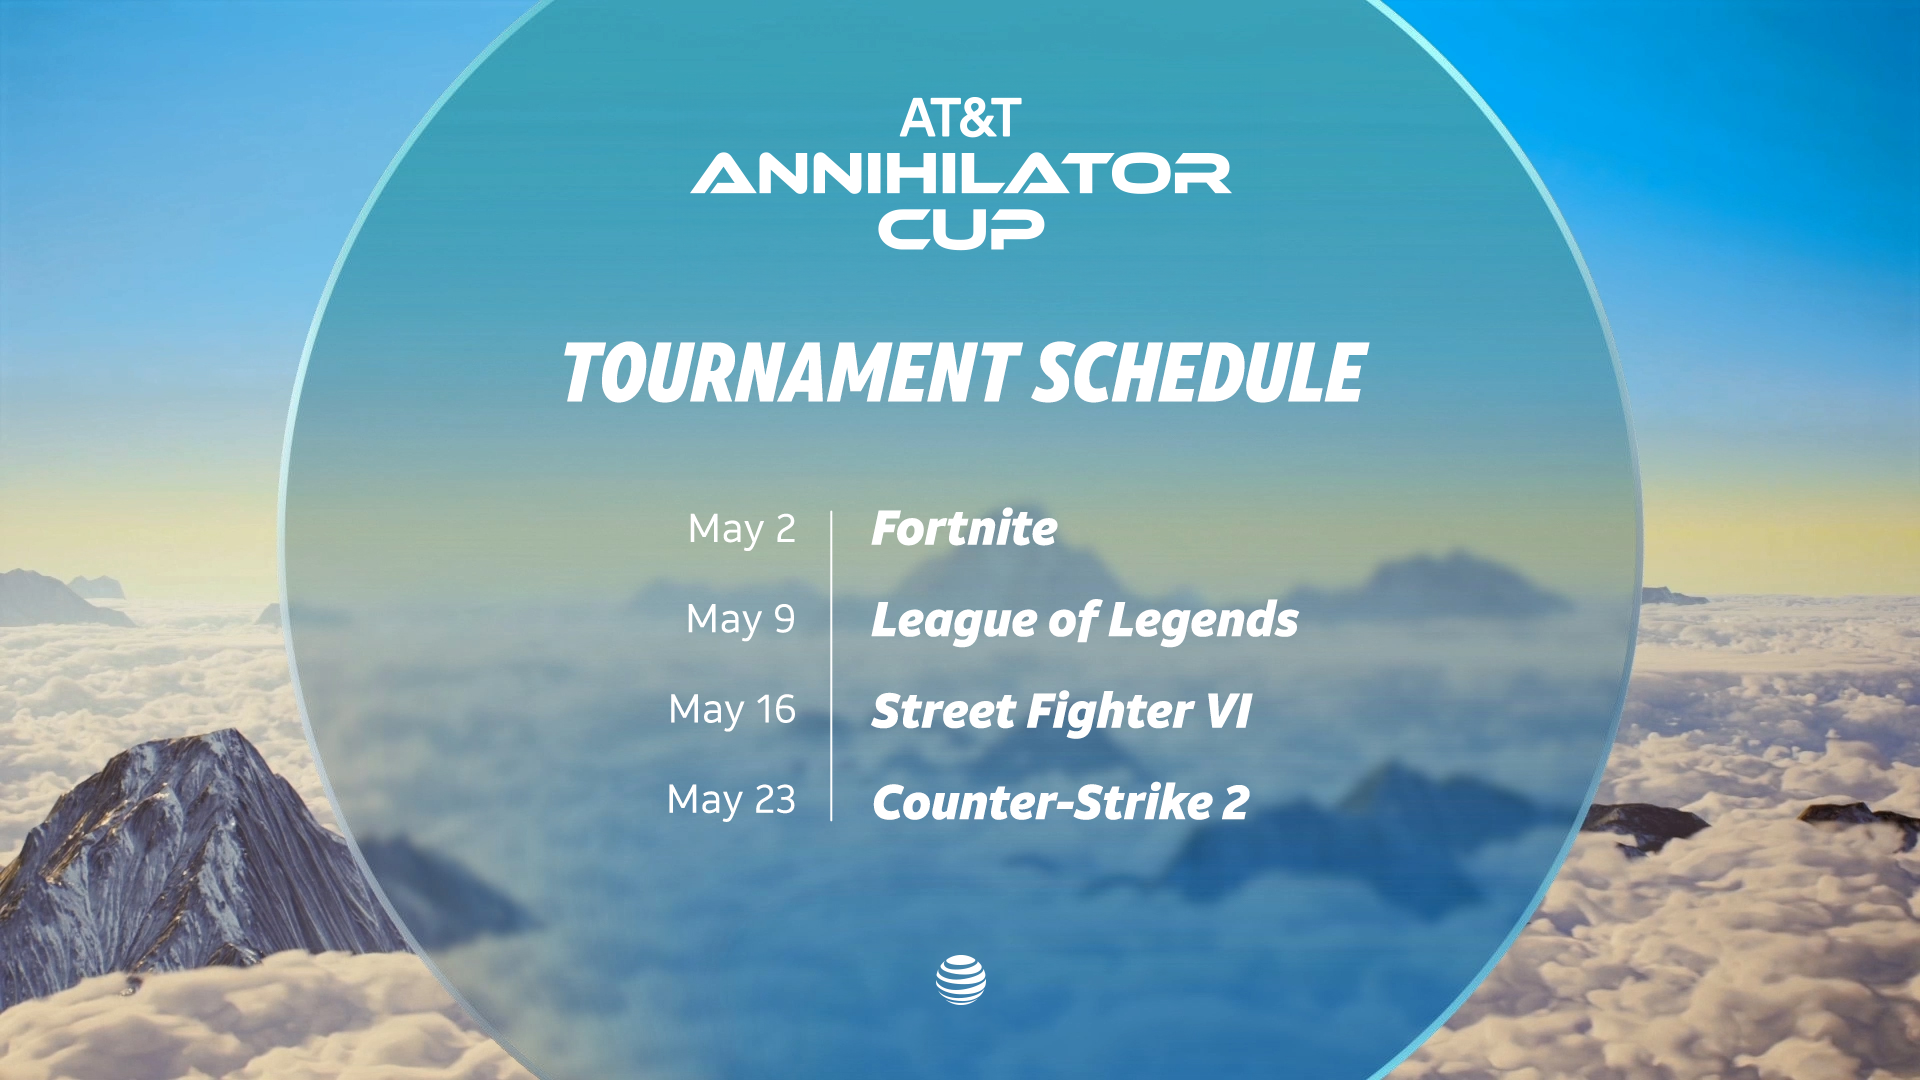 AT&T Annihilator Cup Tournament Schedule | May 2, Fortnite; May 9, League of Legends; May 16, Street Fighter VI; May 23, Counter-Strike 2